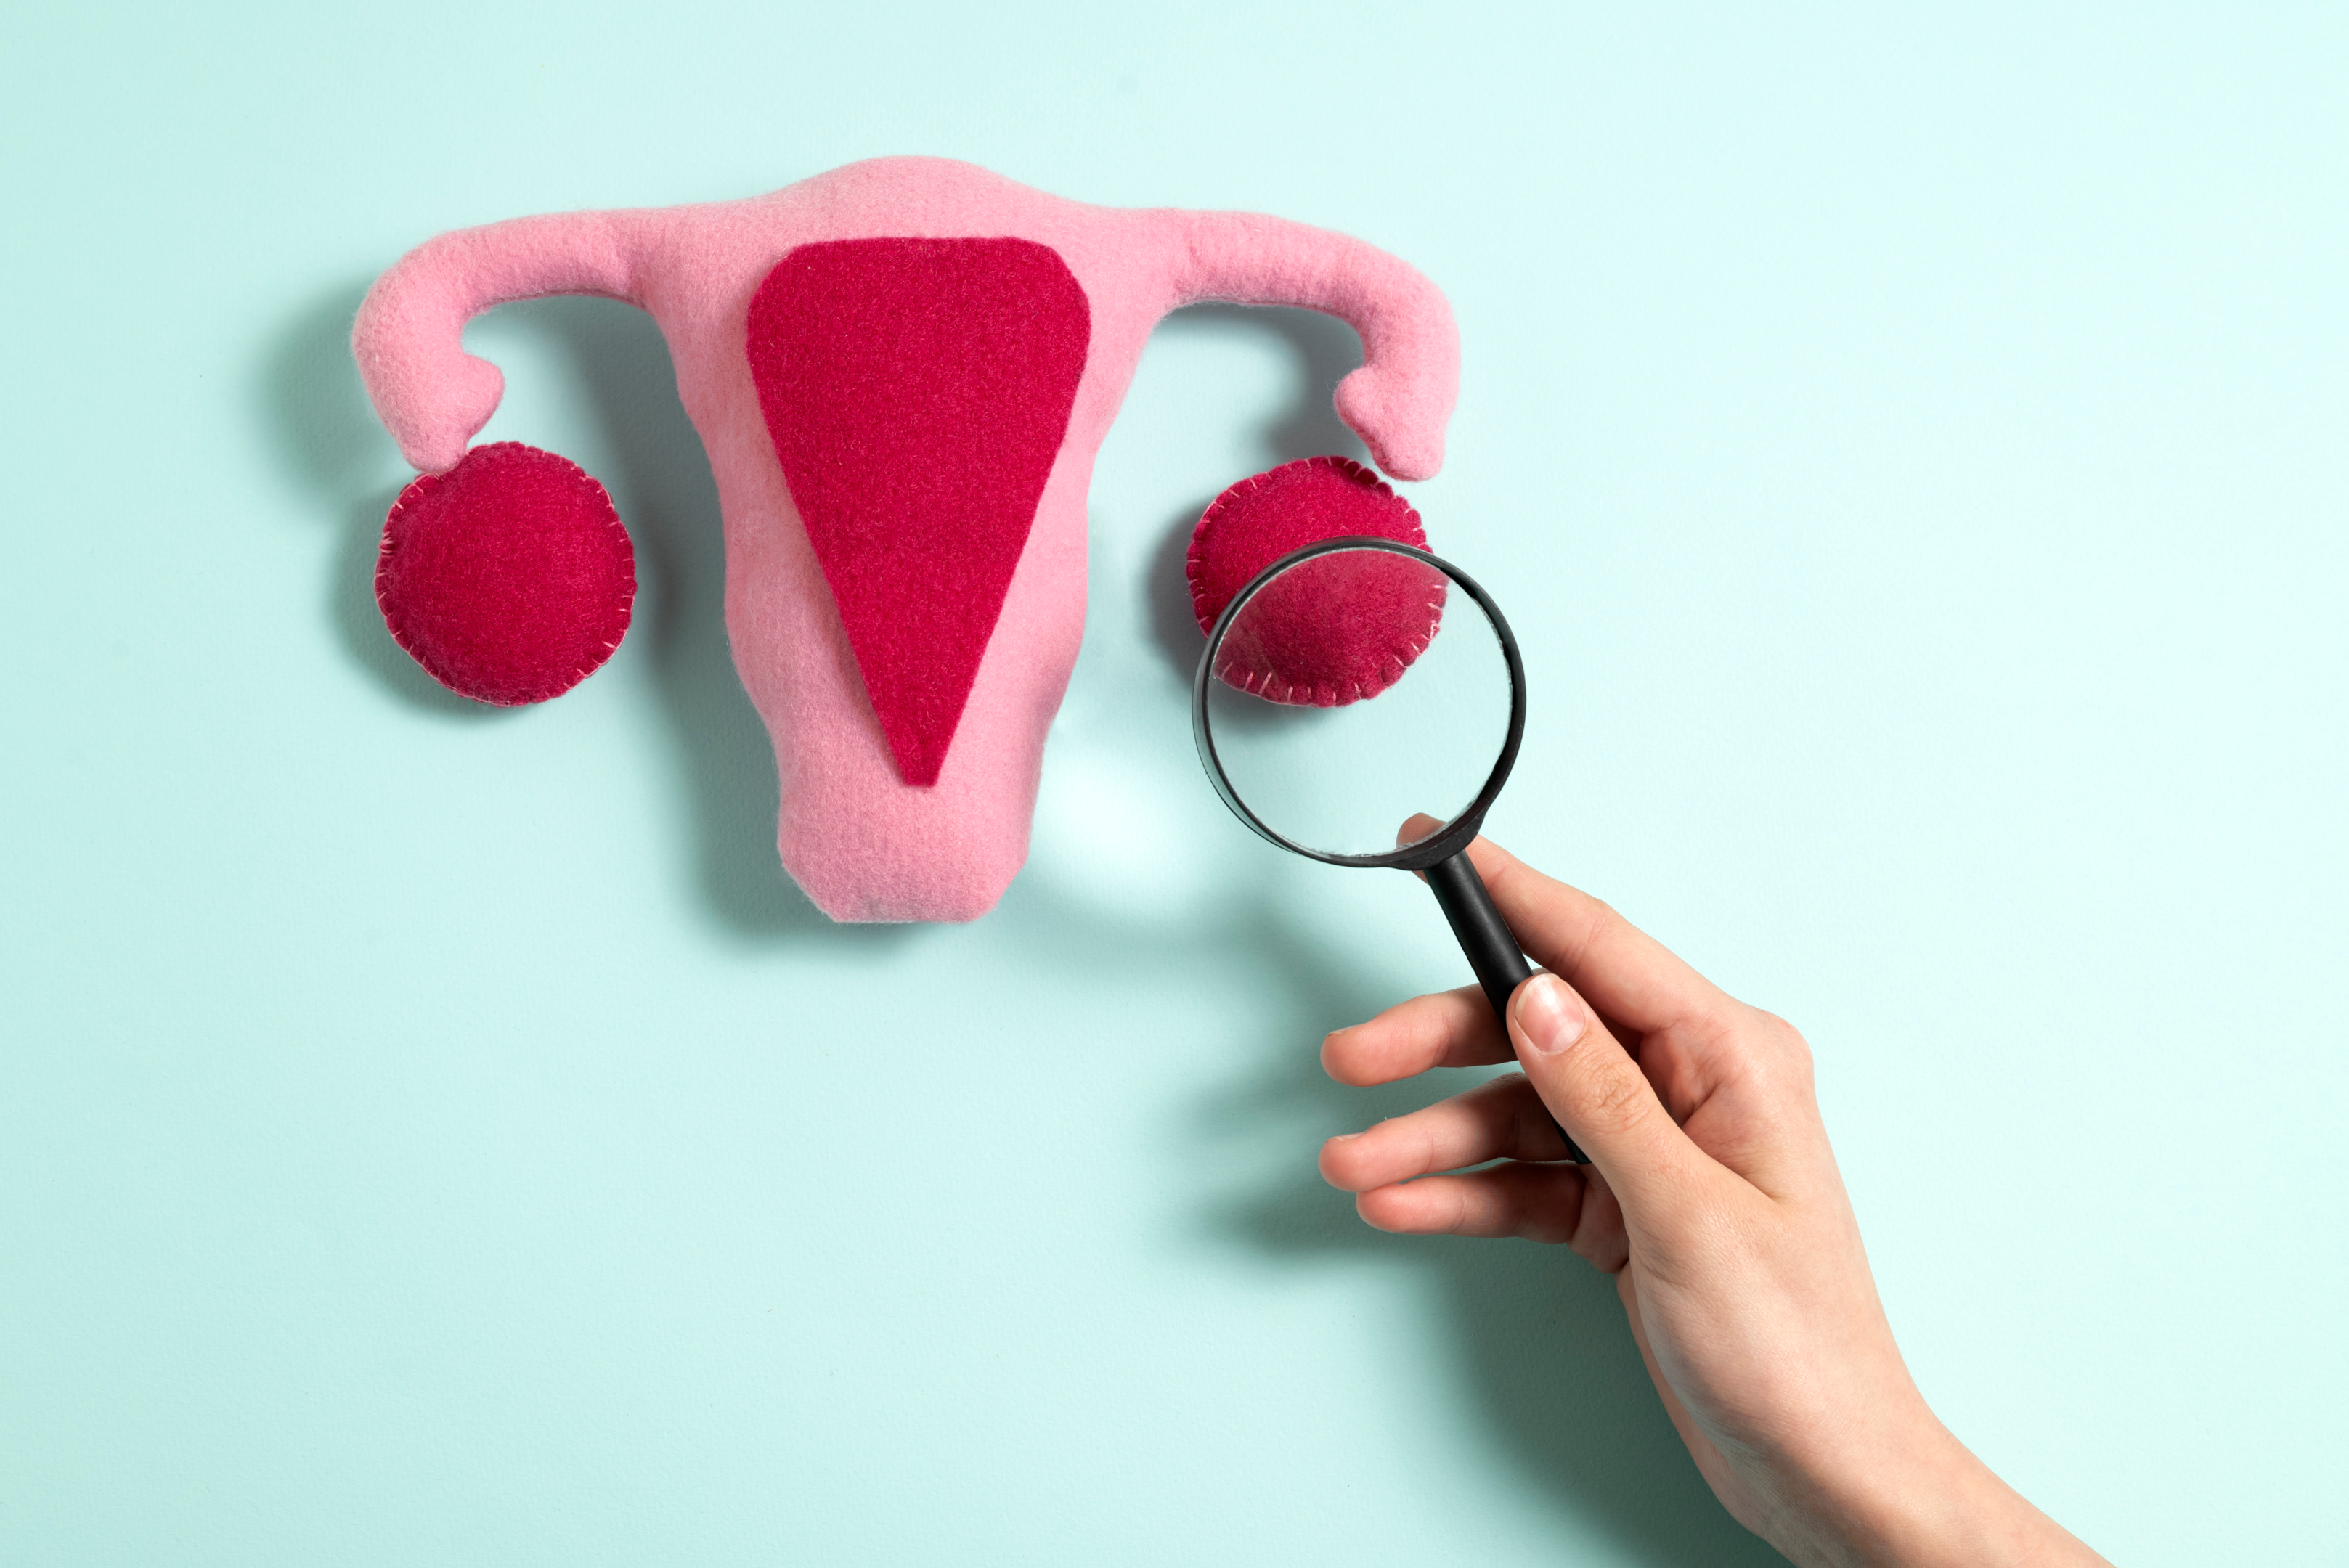 Cysts may be present on a single or both the ovaries